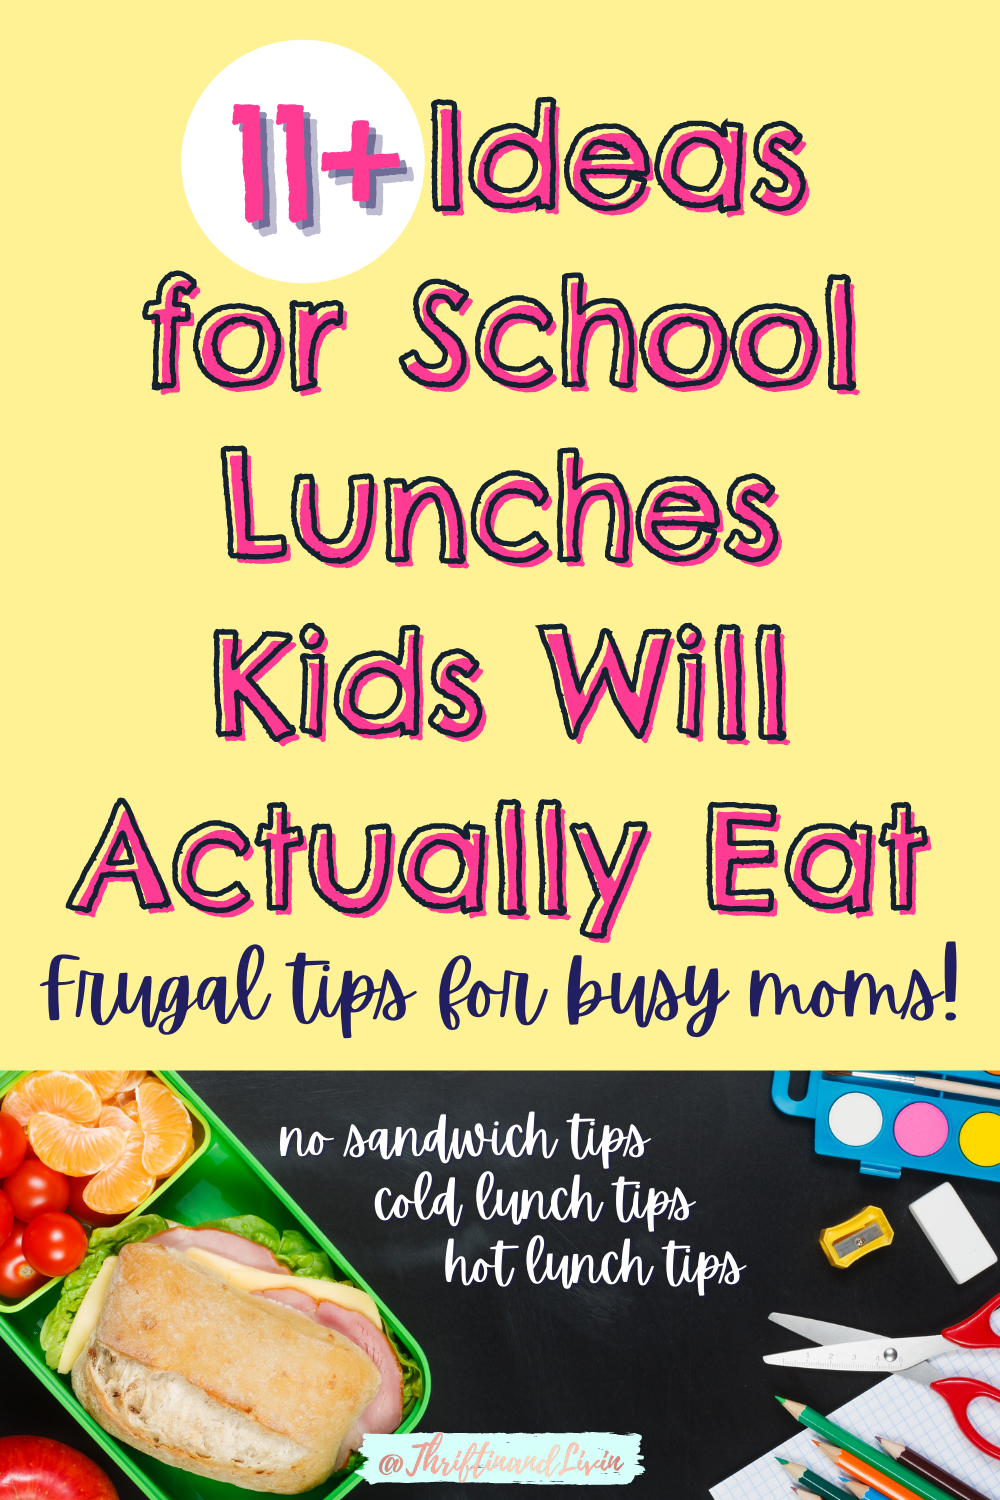 Ideas for School Lunches Pinterest Image with a yellow background and school lunch image at the bottom of the pin.